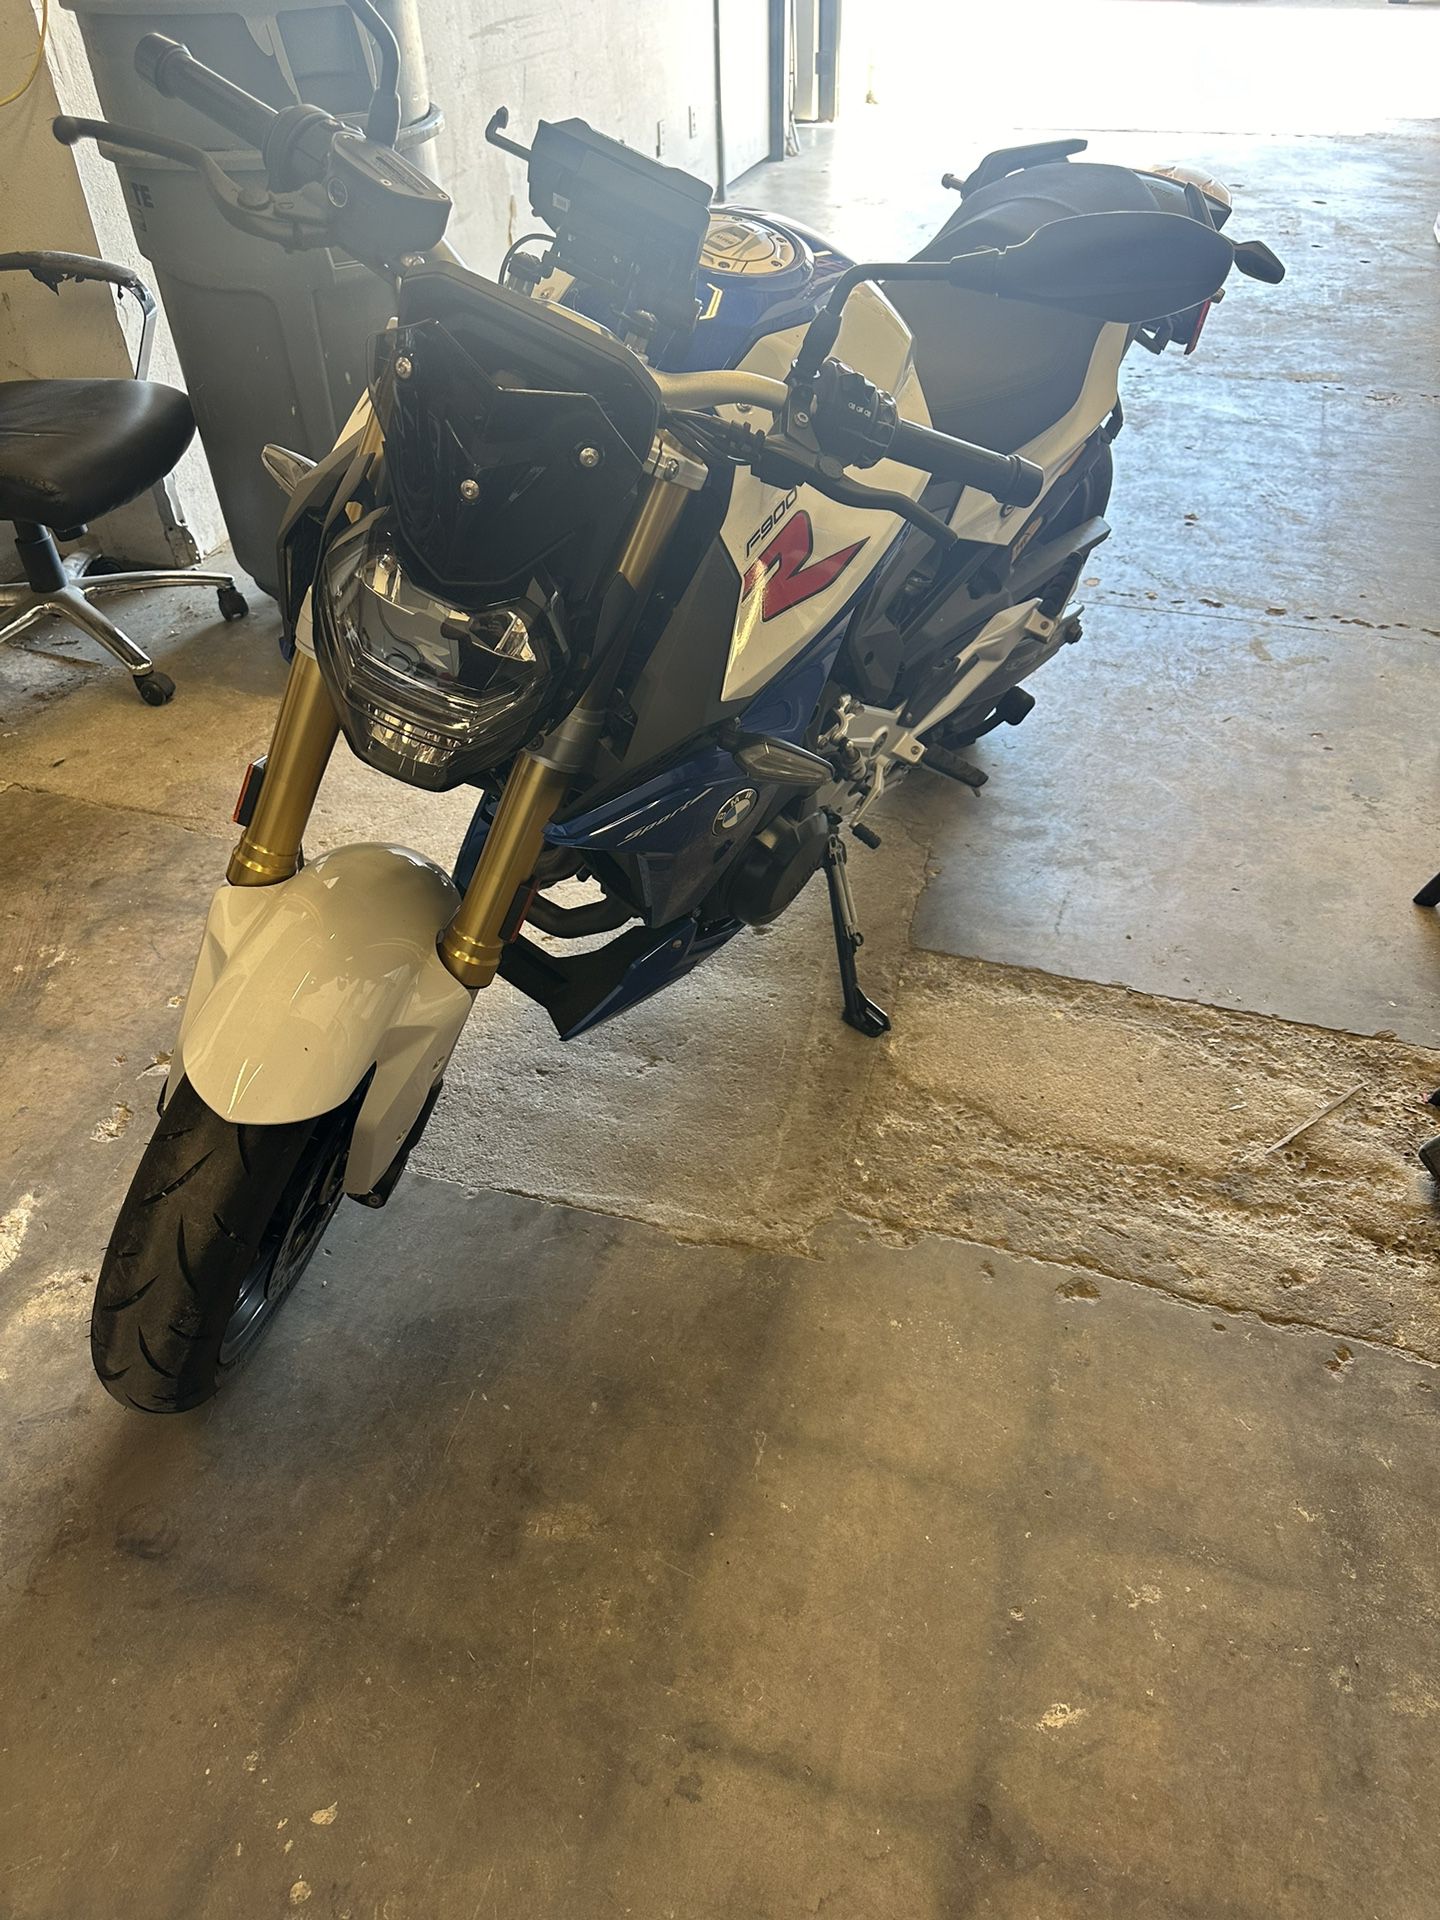 Motorcycle BMW 900 CC For Sale Or Trade For RAM VAN 